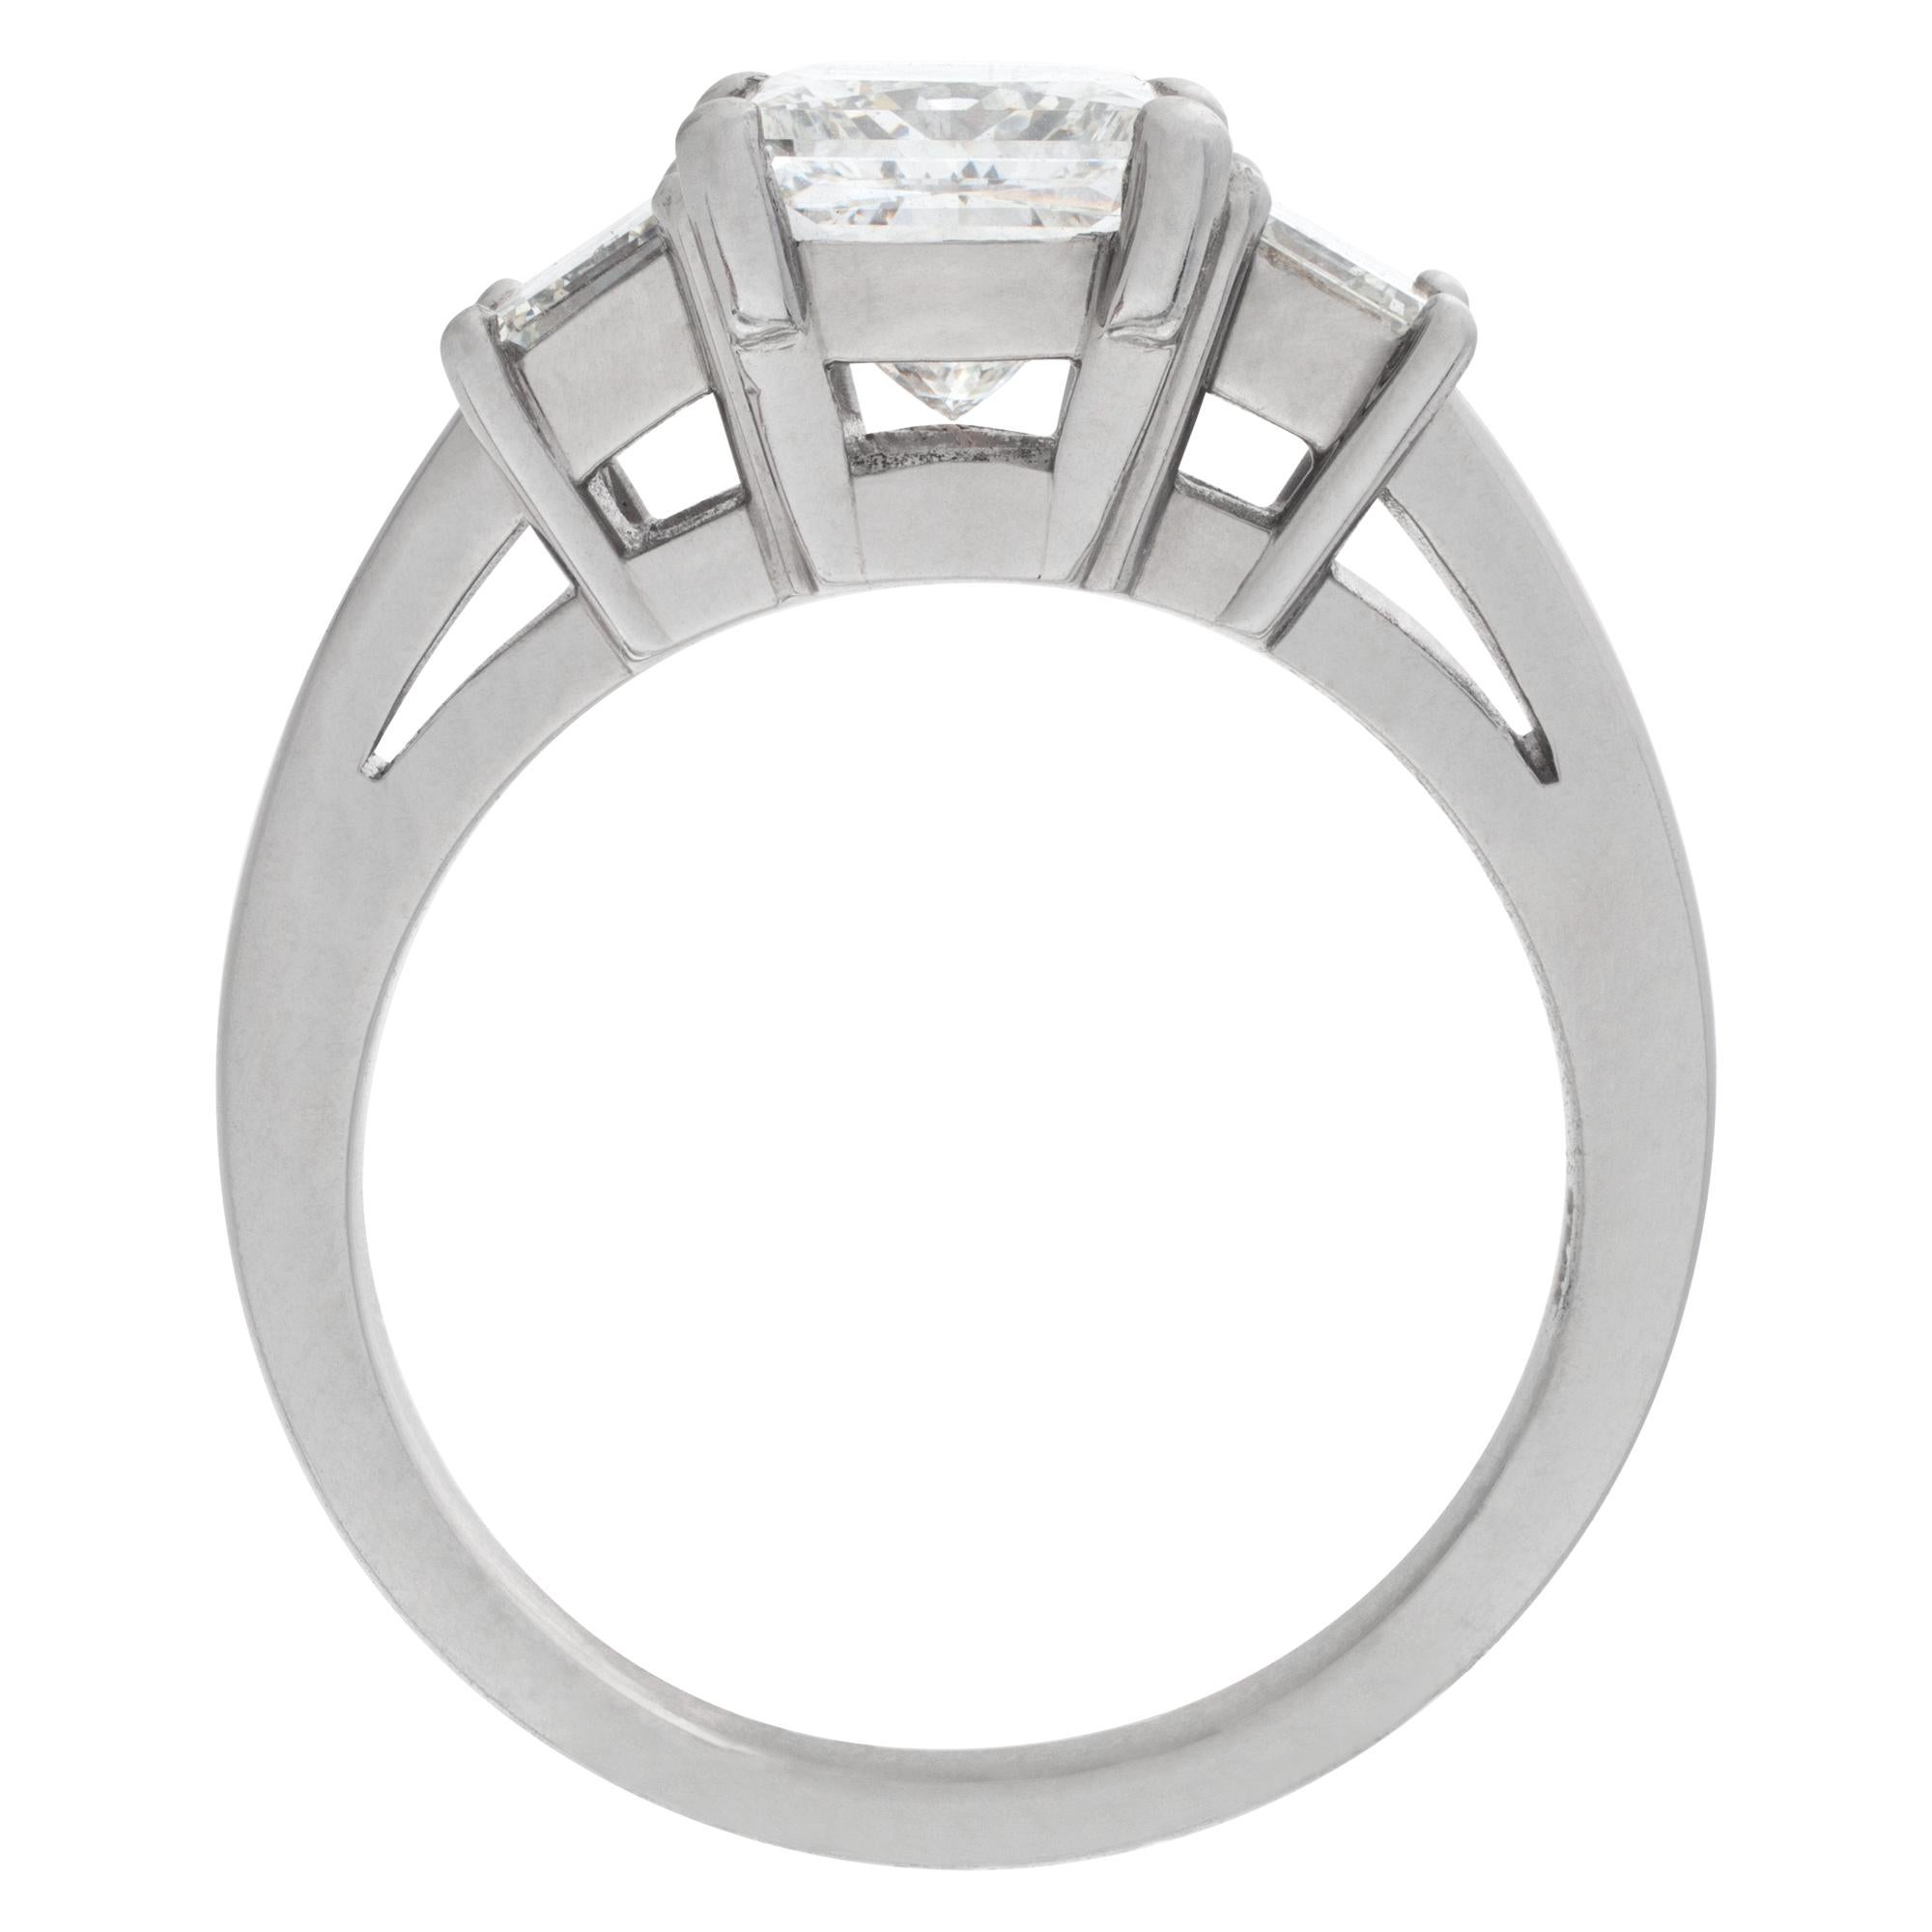 ESTIMATED RETAIL: $45,750.00
G&S PRICE: $34,160.00

GIA certified square modified brilliant cut diamond 2.03 carat (G color, VS1 clarity) ring set in platinum mounting. Mounting has 2 emerald cut side diamond, approximately 0.70 carats total weight-